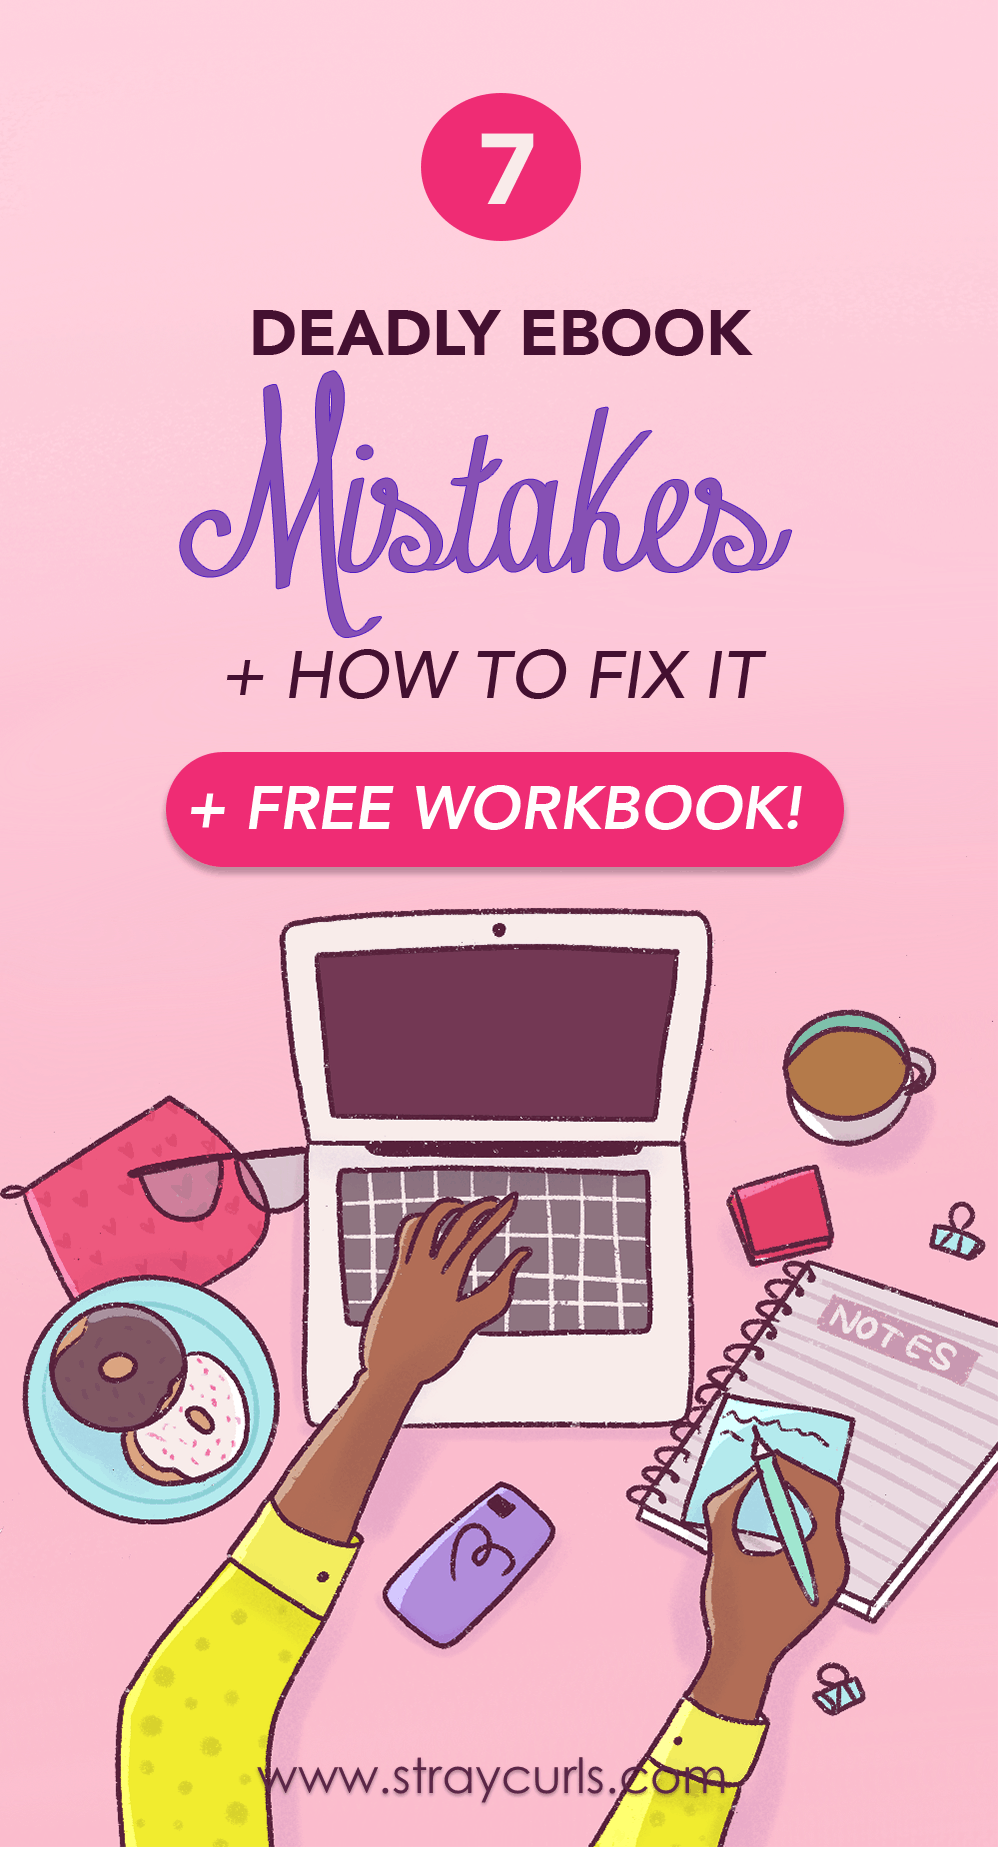 Writing your first eBook? Avoid these deadly ebook mistakes that most Bloggers make which result in no ebook sales and zero customers. Learn how to write and market your eBook like a pro!